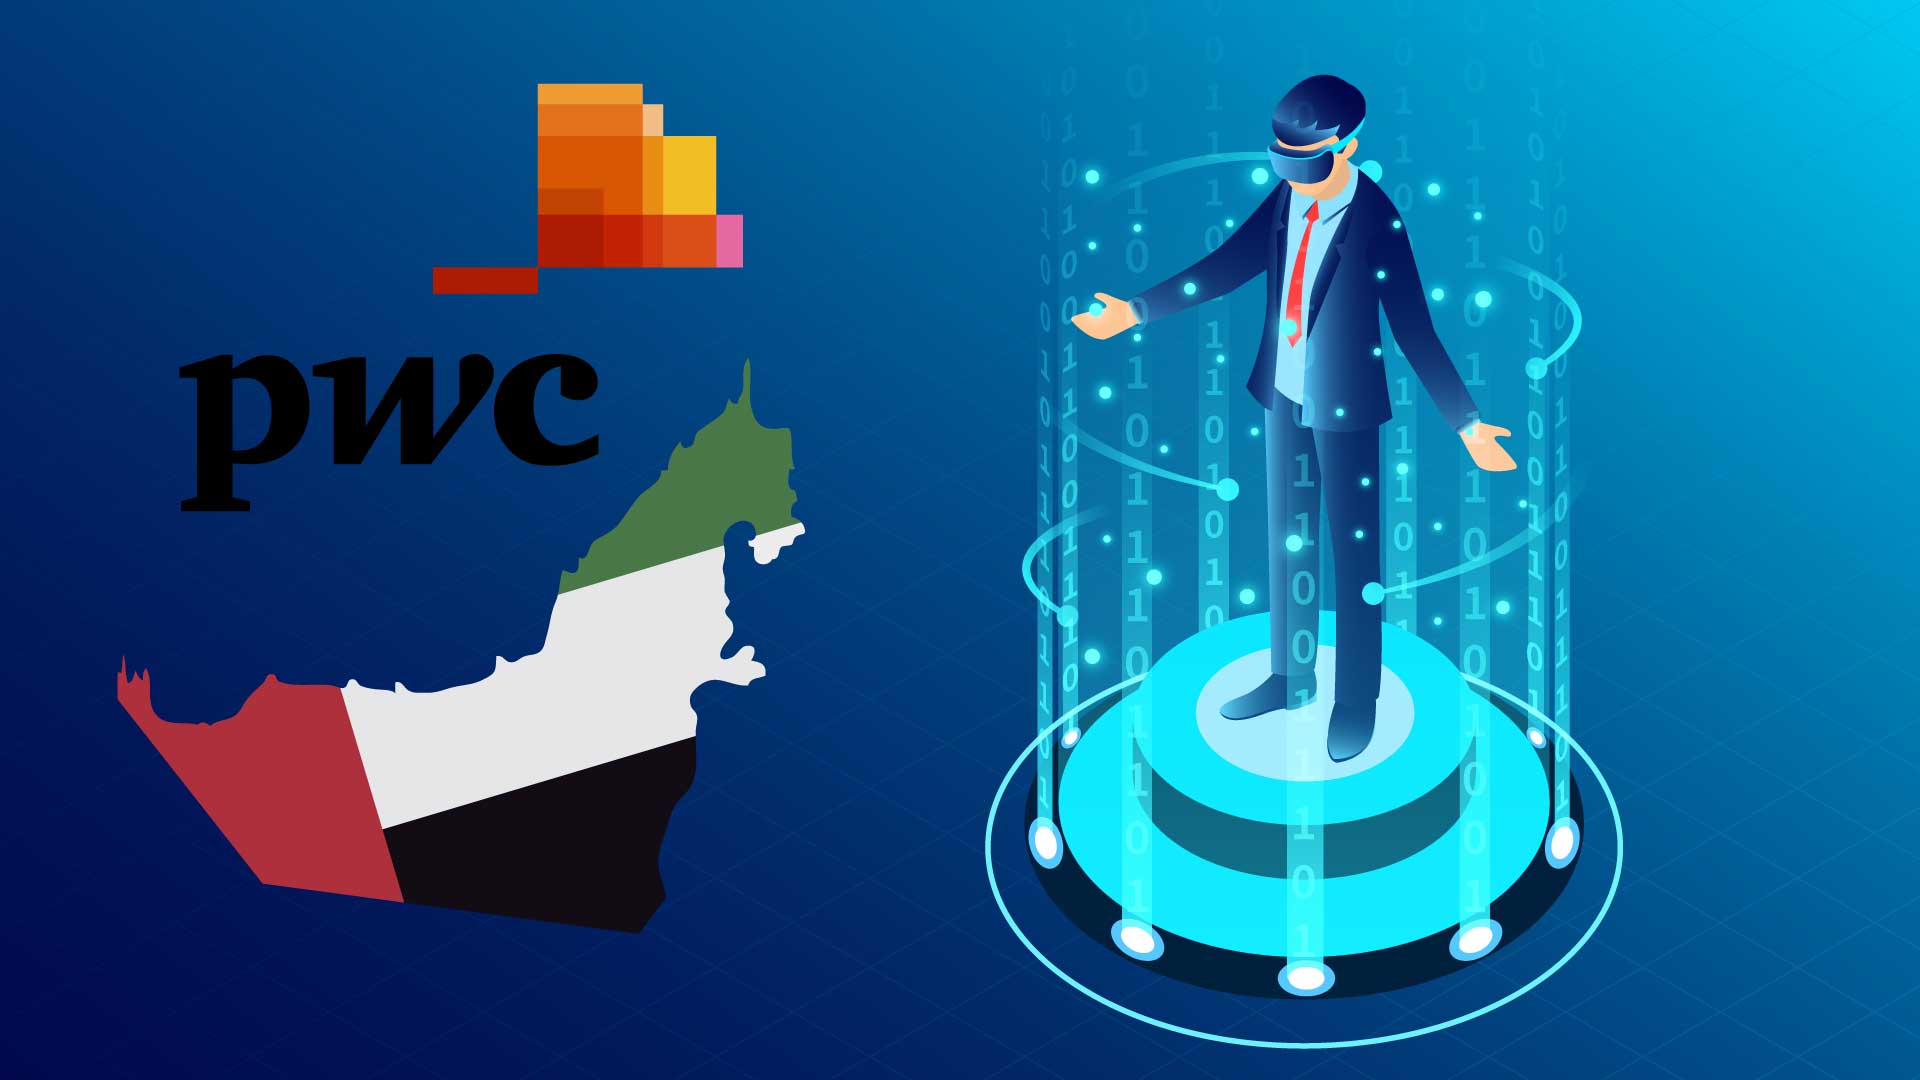 As part of a global analysis into virtual (VR) and augmented reality (AR), PwC has calculated a $1.5 trillion boost to the global economy by 2030.